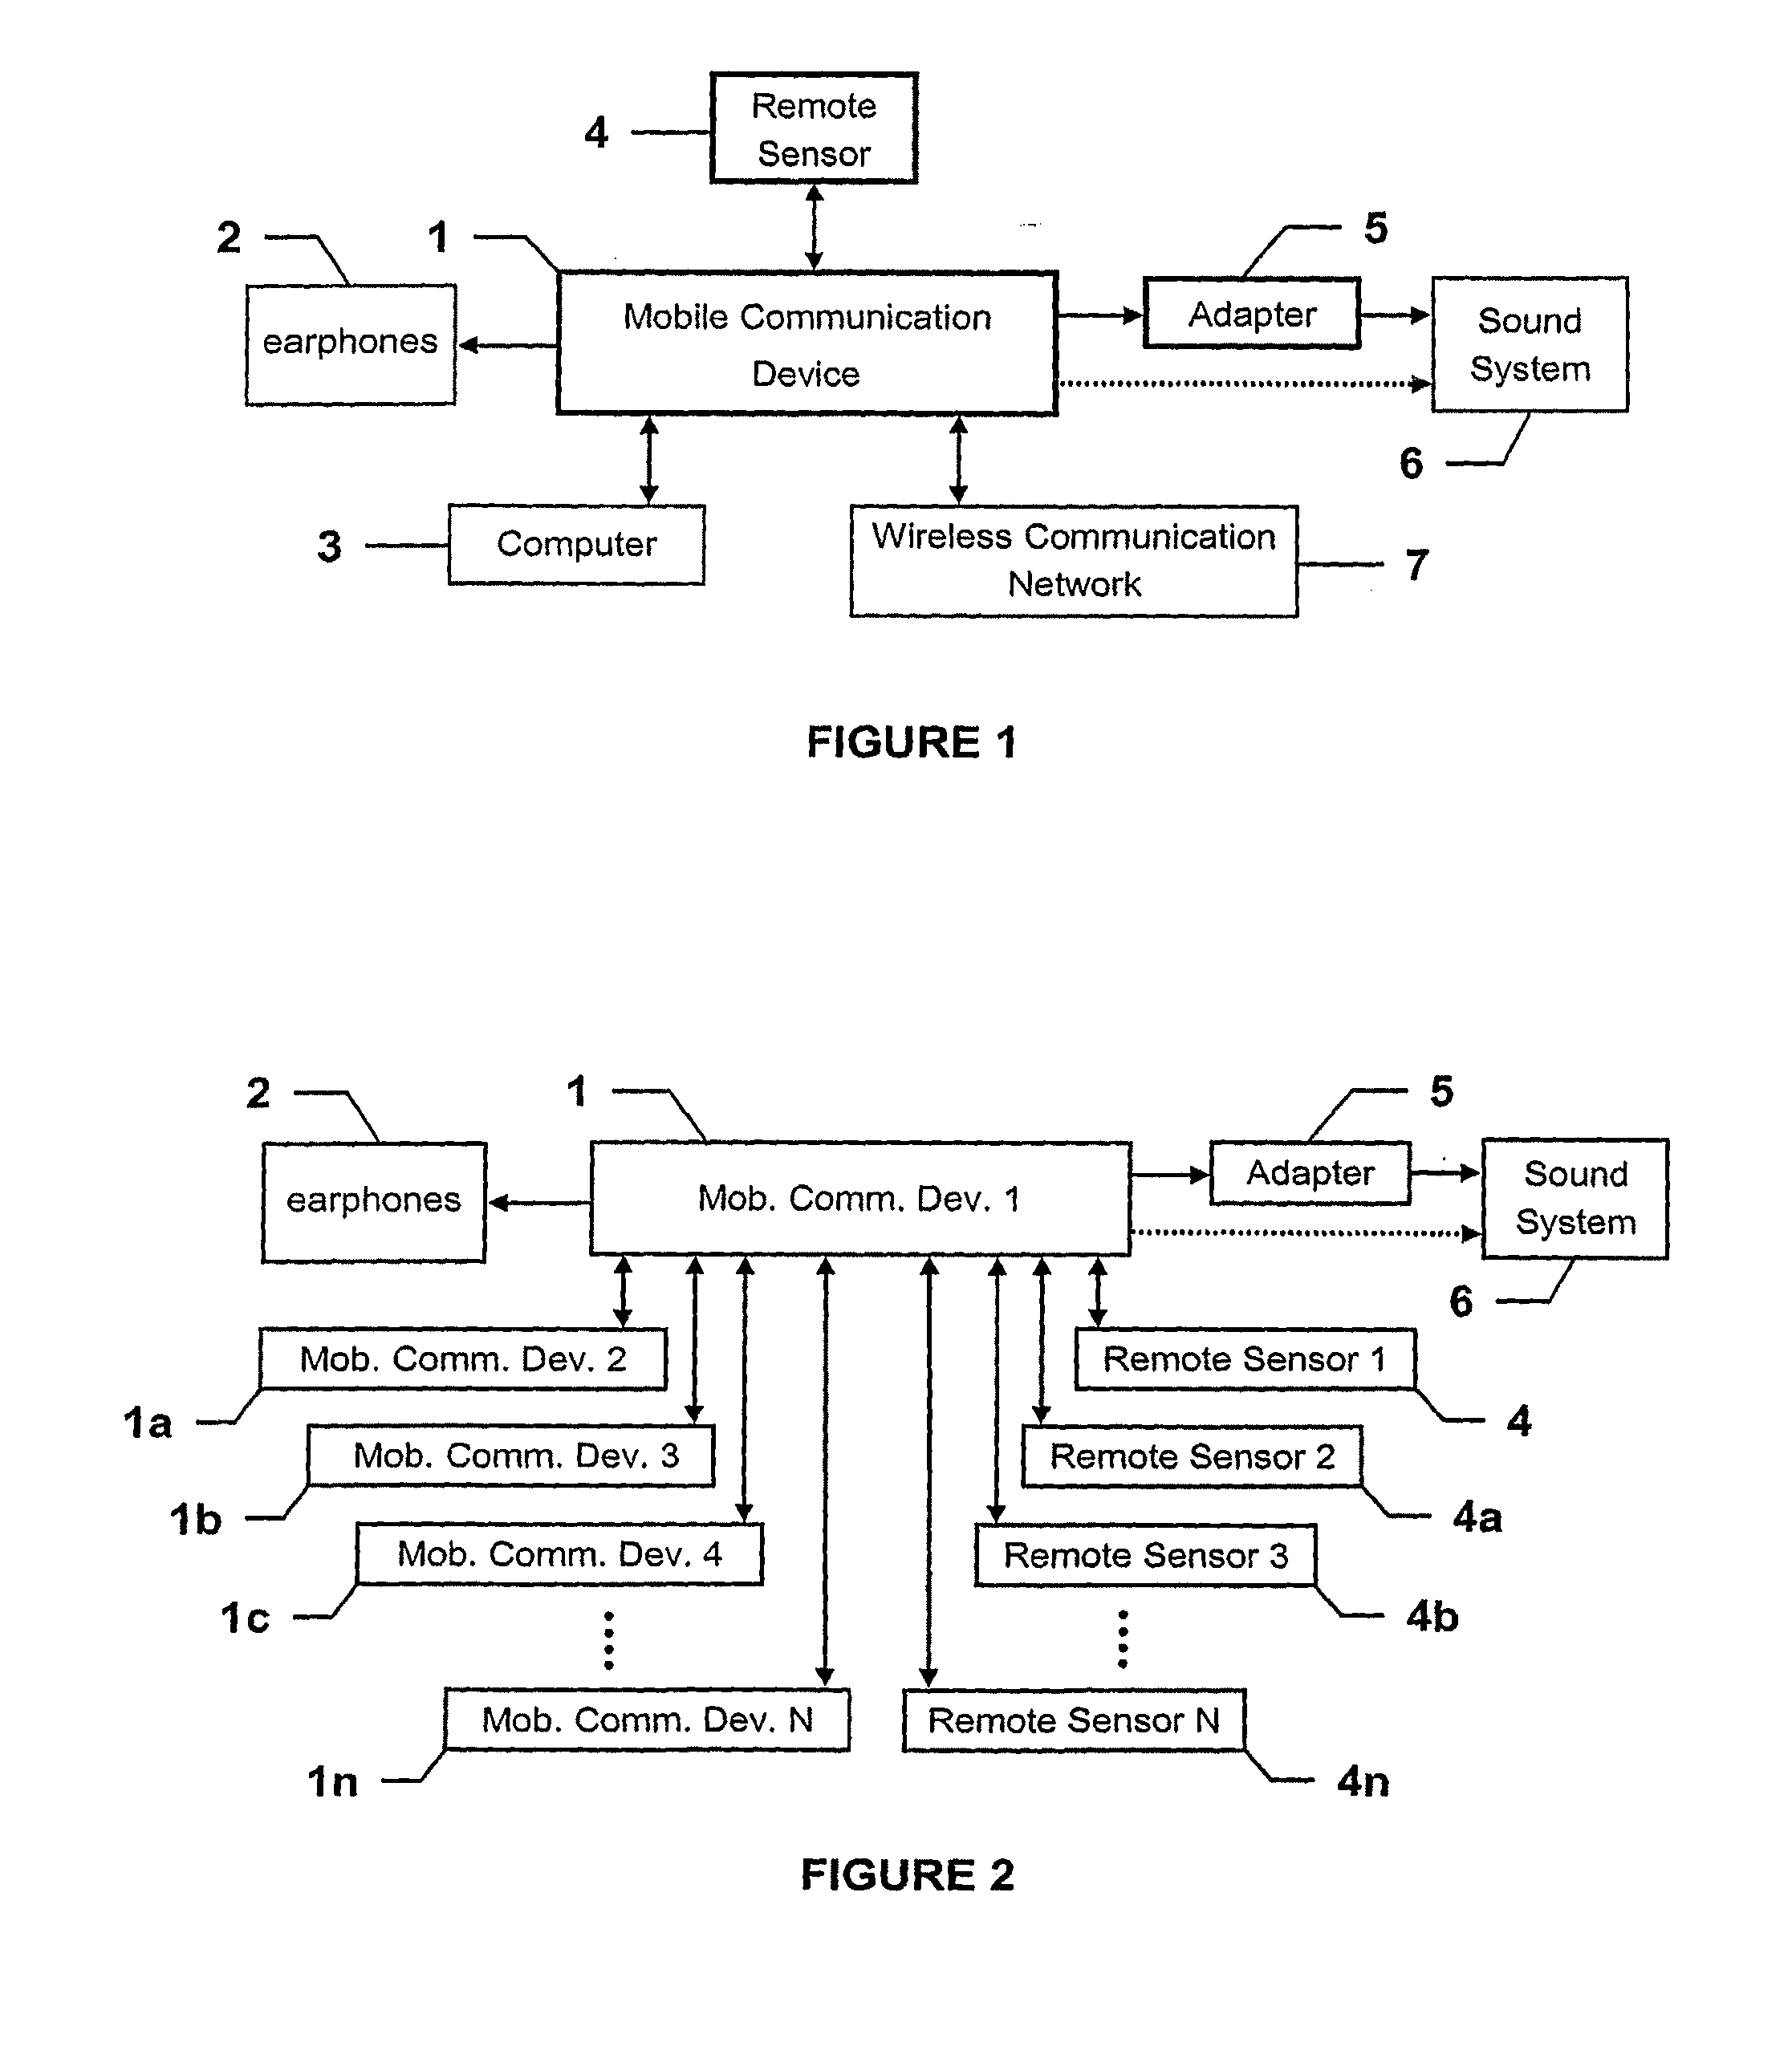 Mobile Communication Device with Musical Instrument Functions